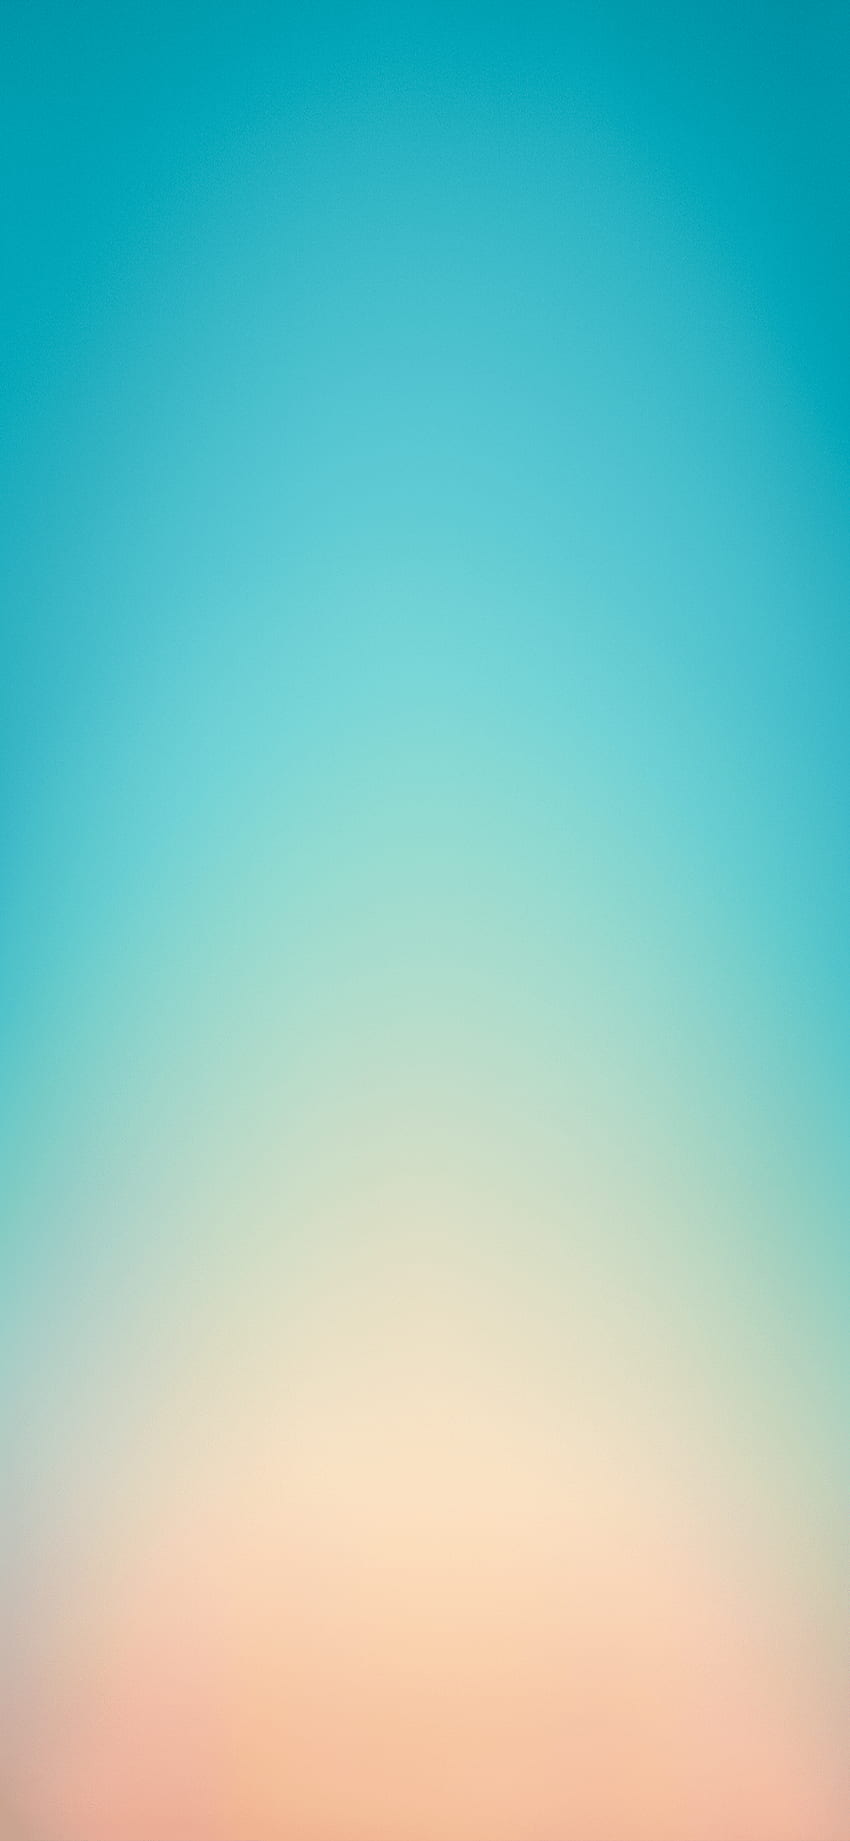 Original Apple Brilliantly Optimized For Your iPhone X HD phone wallpaper